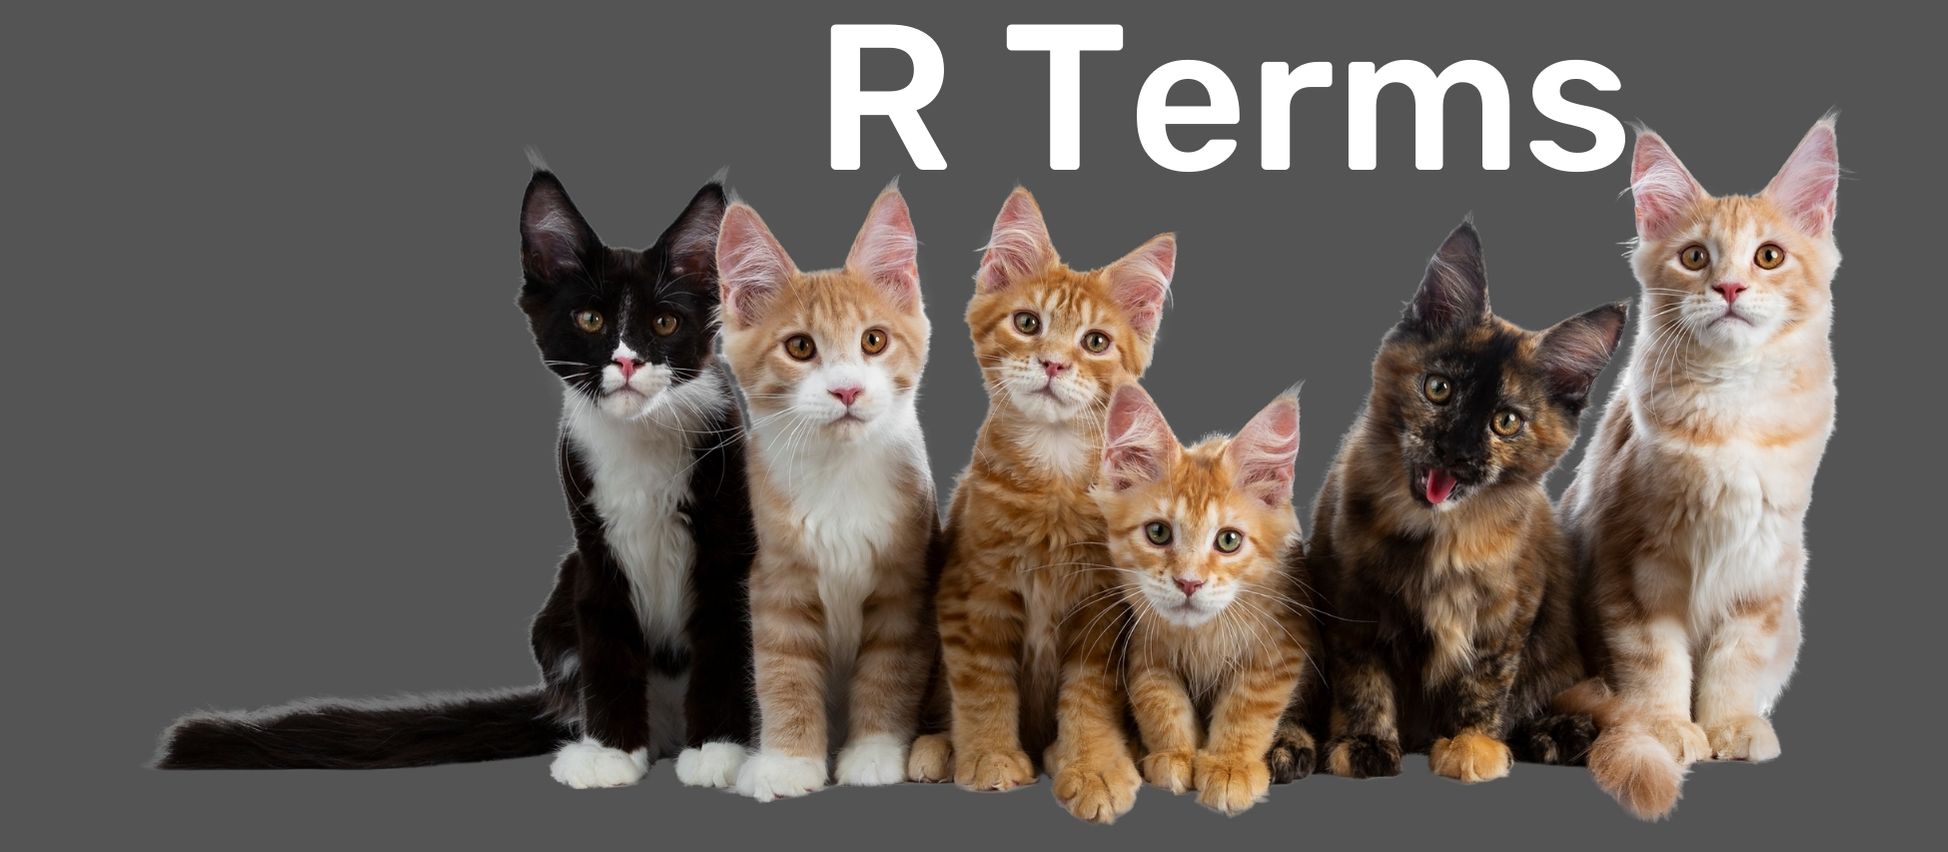 Group of six cats in front of a gray background with text reading 'R Terms' at the top to indicate a new section of the glossary